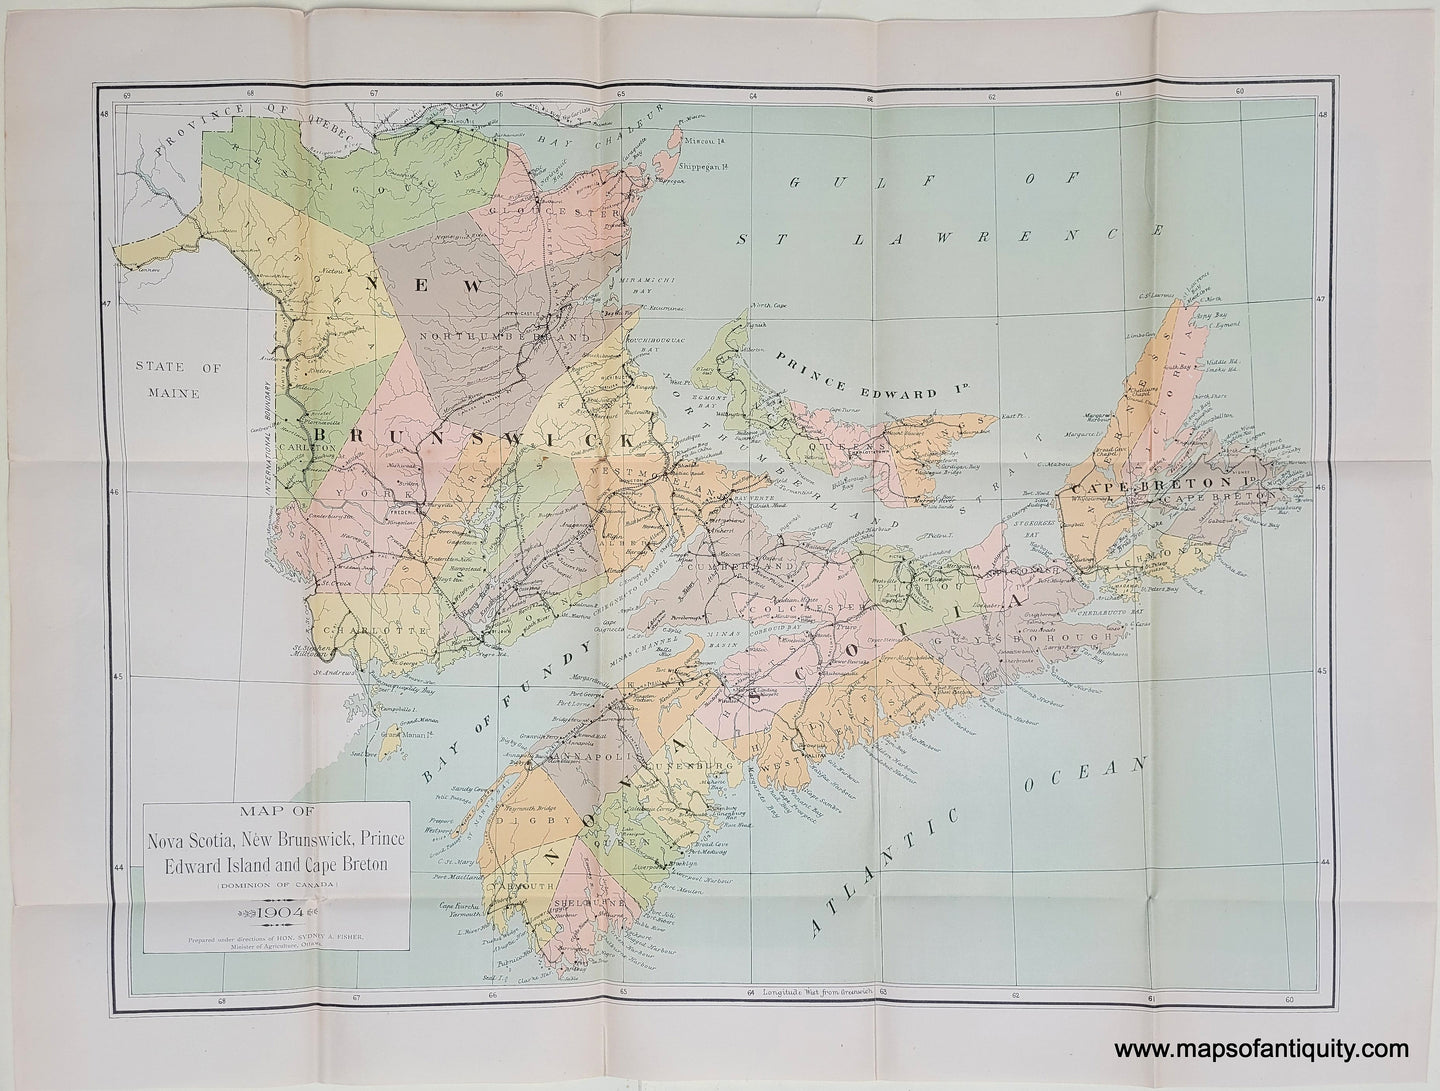 Genuine-Antique-Map-Map-of-Nova-Scotia-New-Brunswick-Prince-Edward-Island-and-Cape-Breton-Dominion-of-Canada-1904-Department-of-Agriculture-Maps-Of-Antiquity